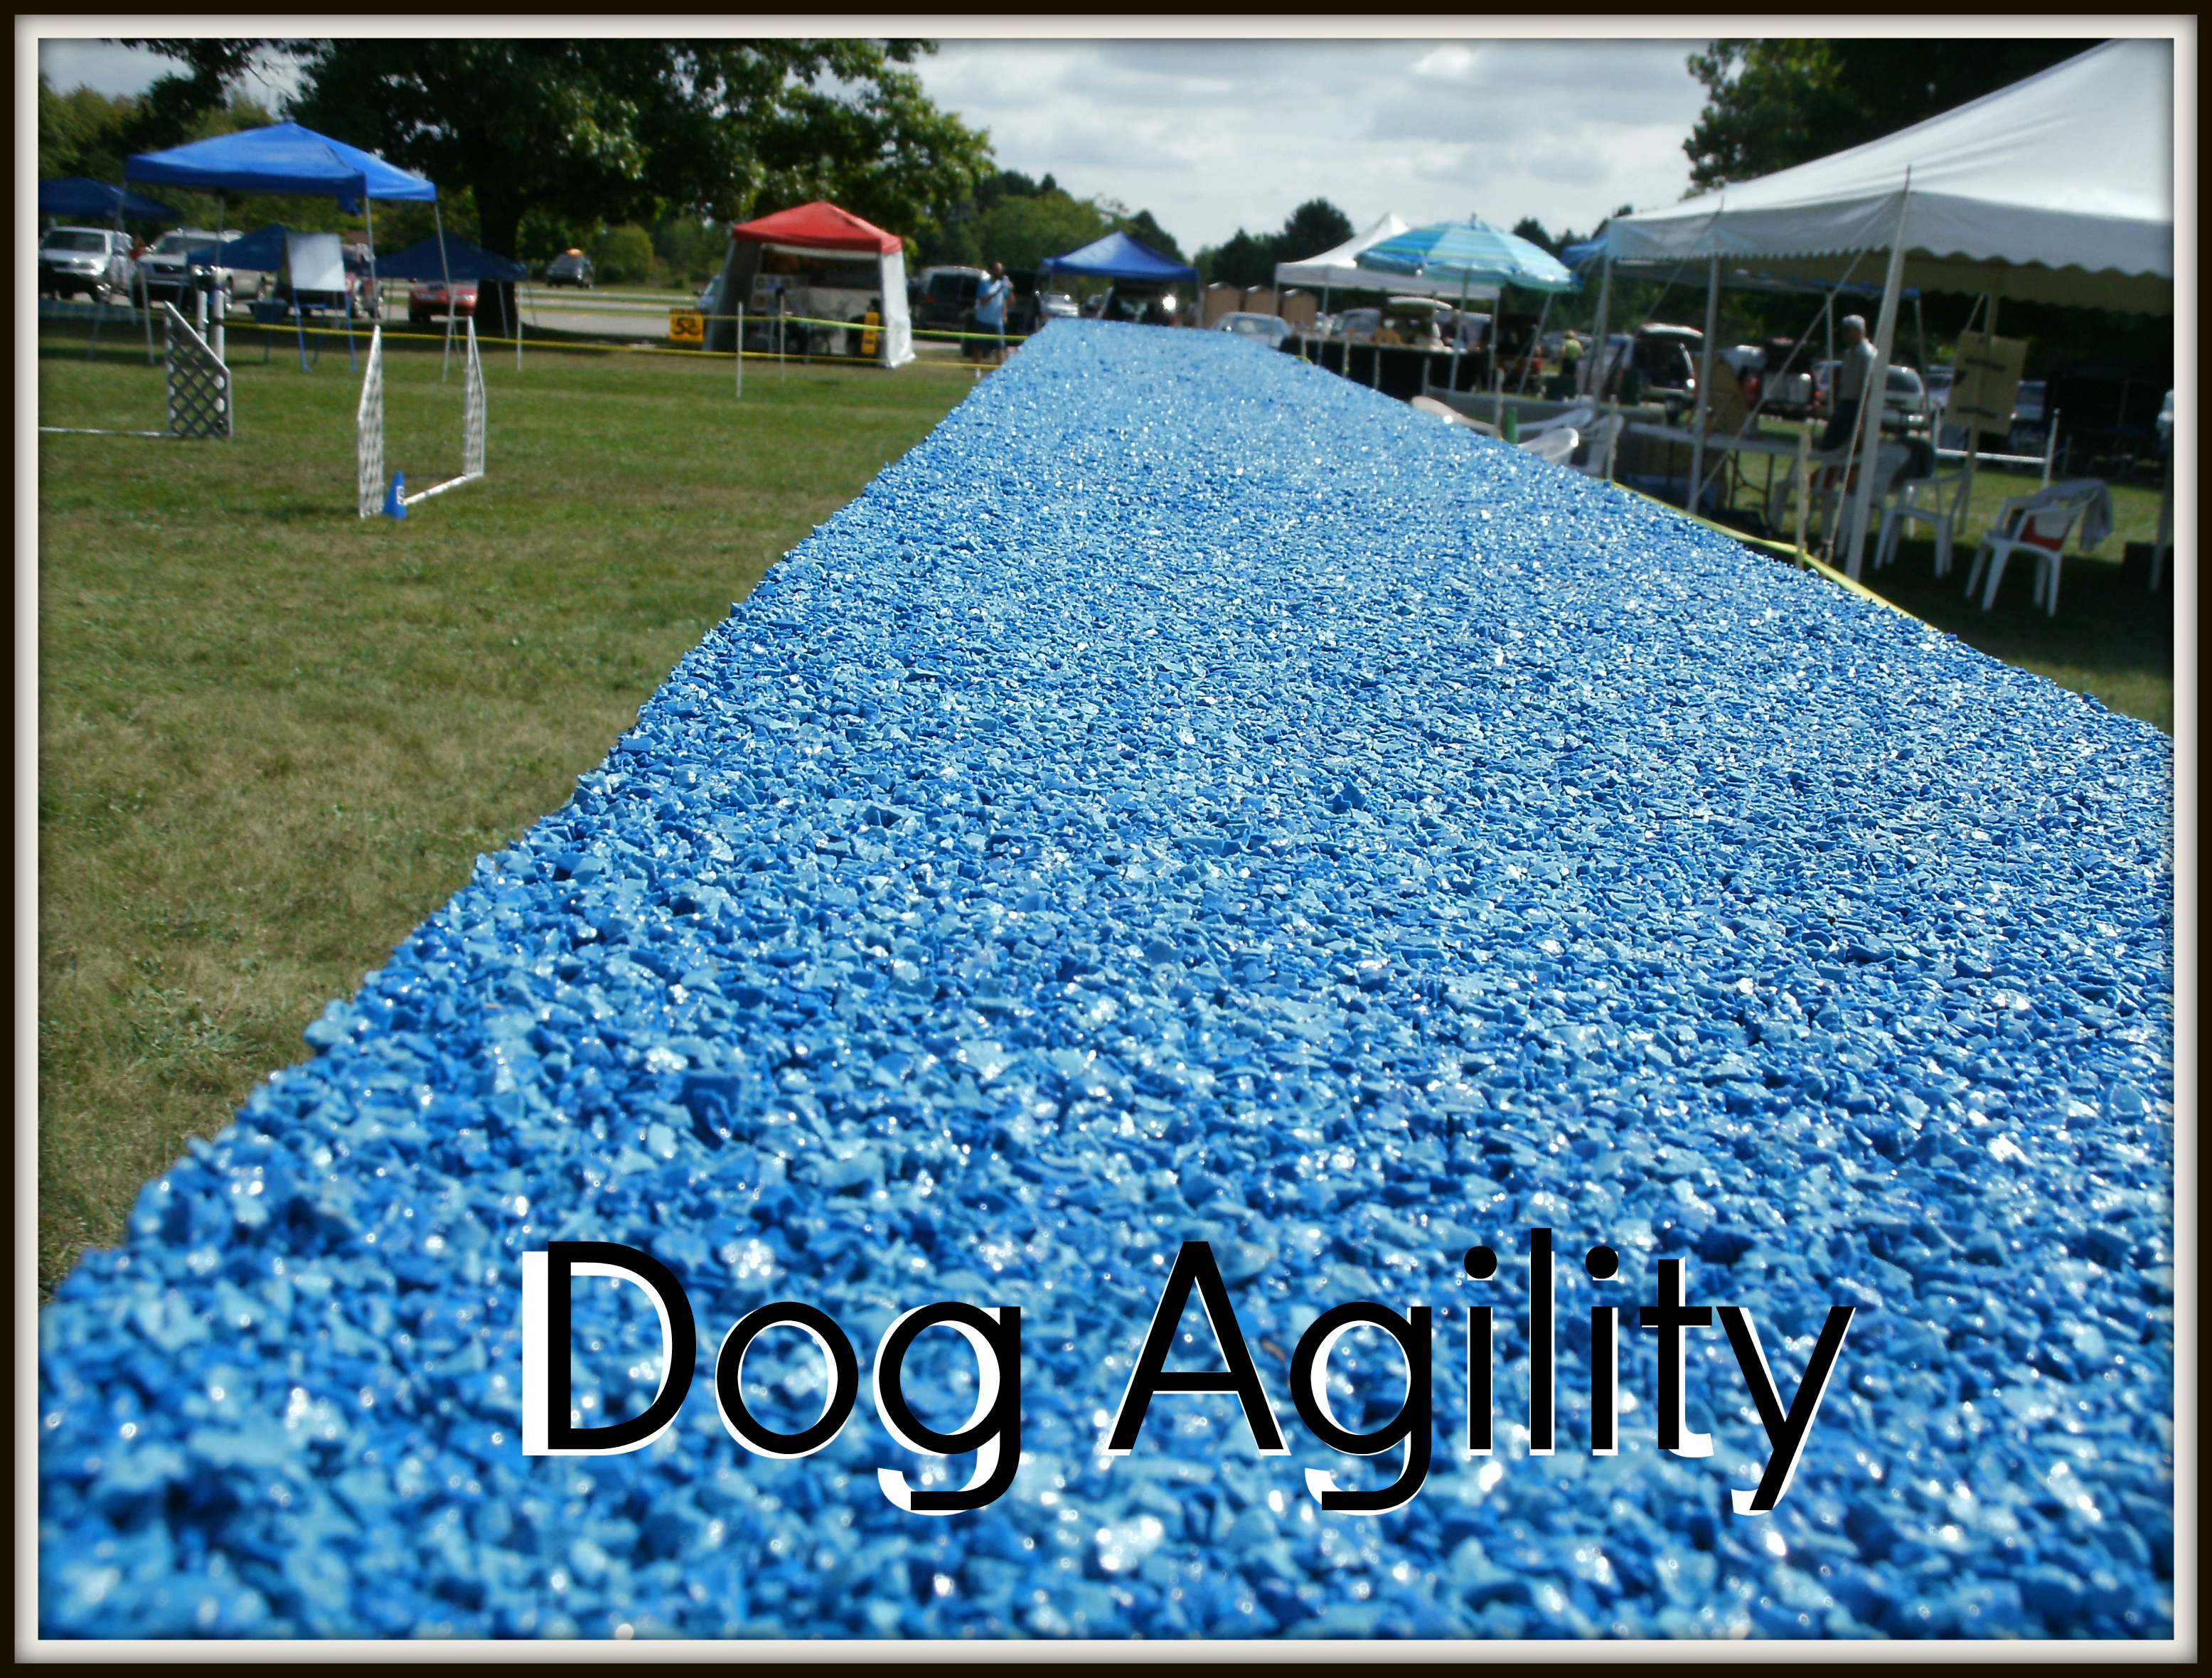 K9 Agility Surfacing ~American Recycling Center